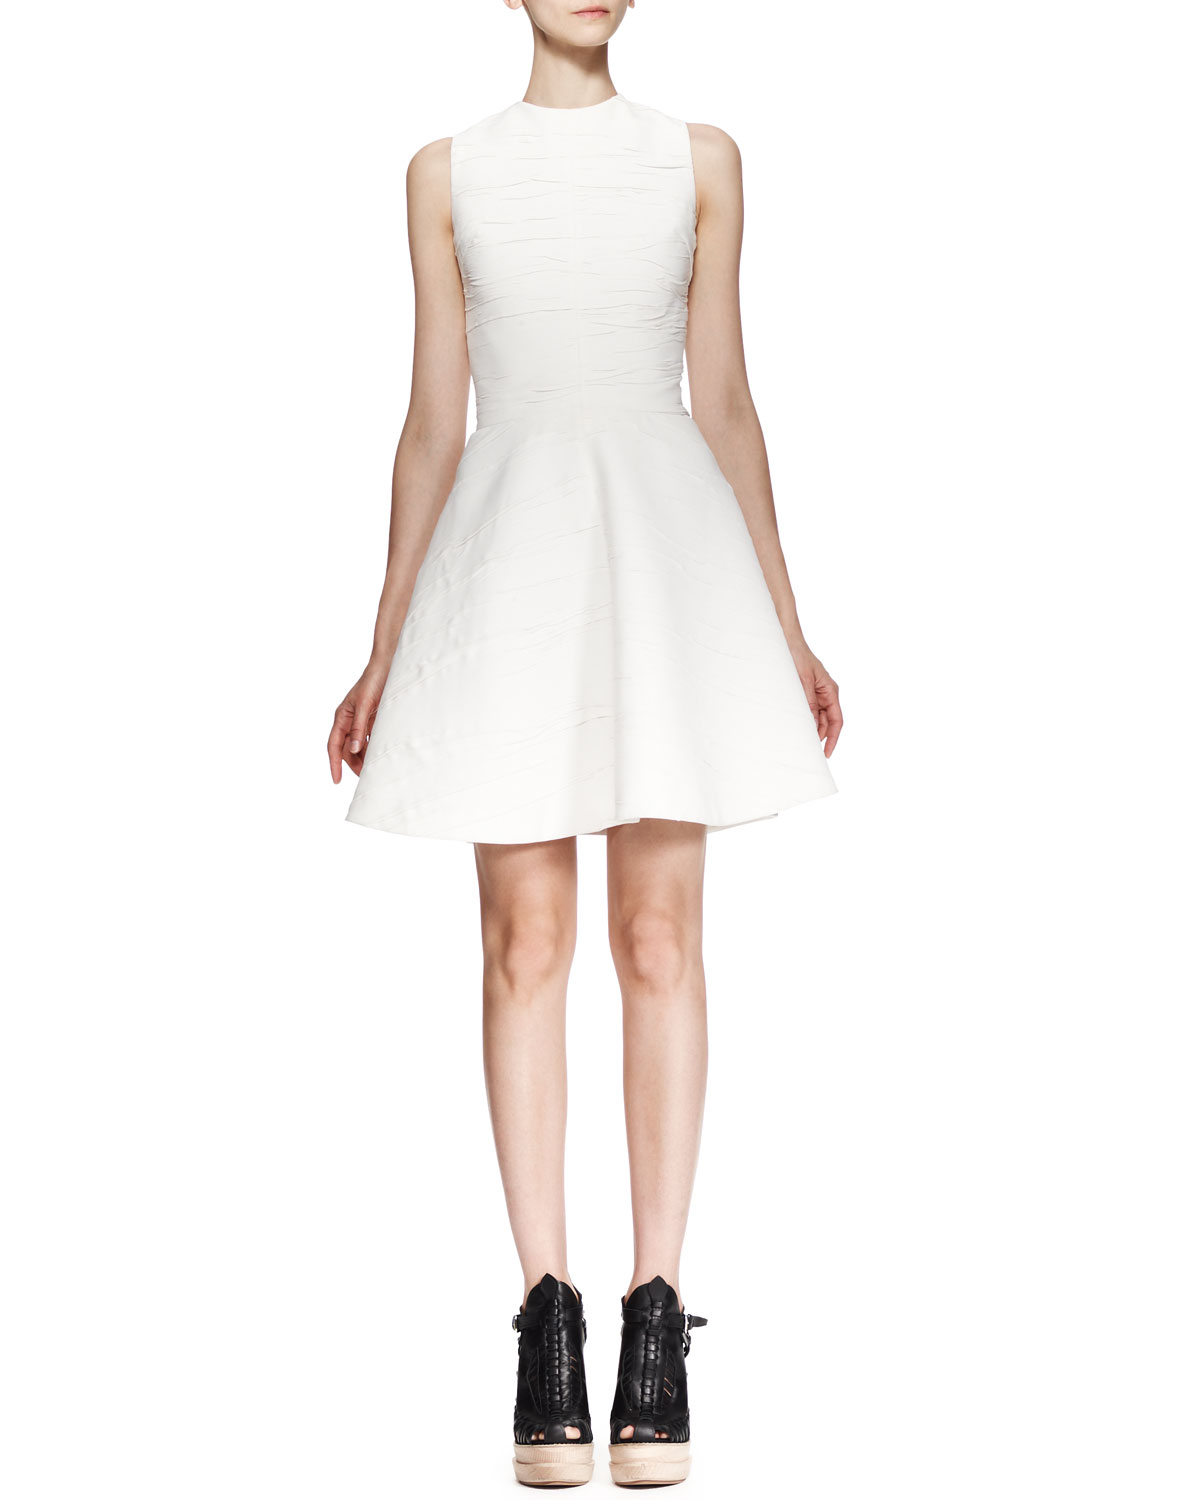 Lyst - Proenza Schouler Sleeveless Fit-And-Flare Dress in White